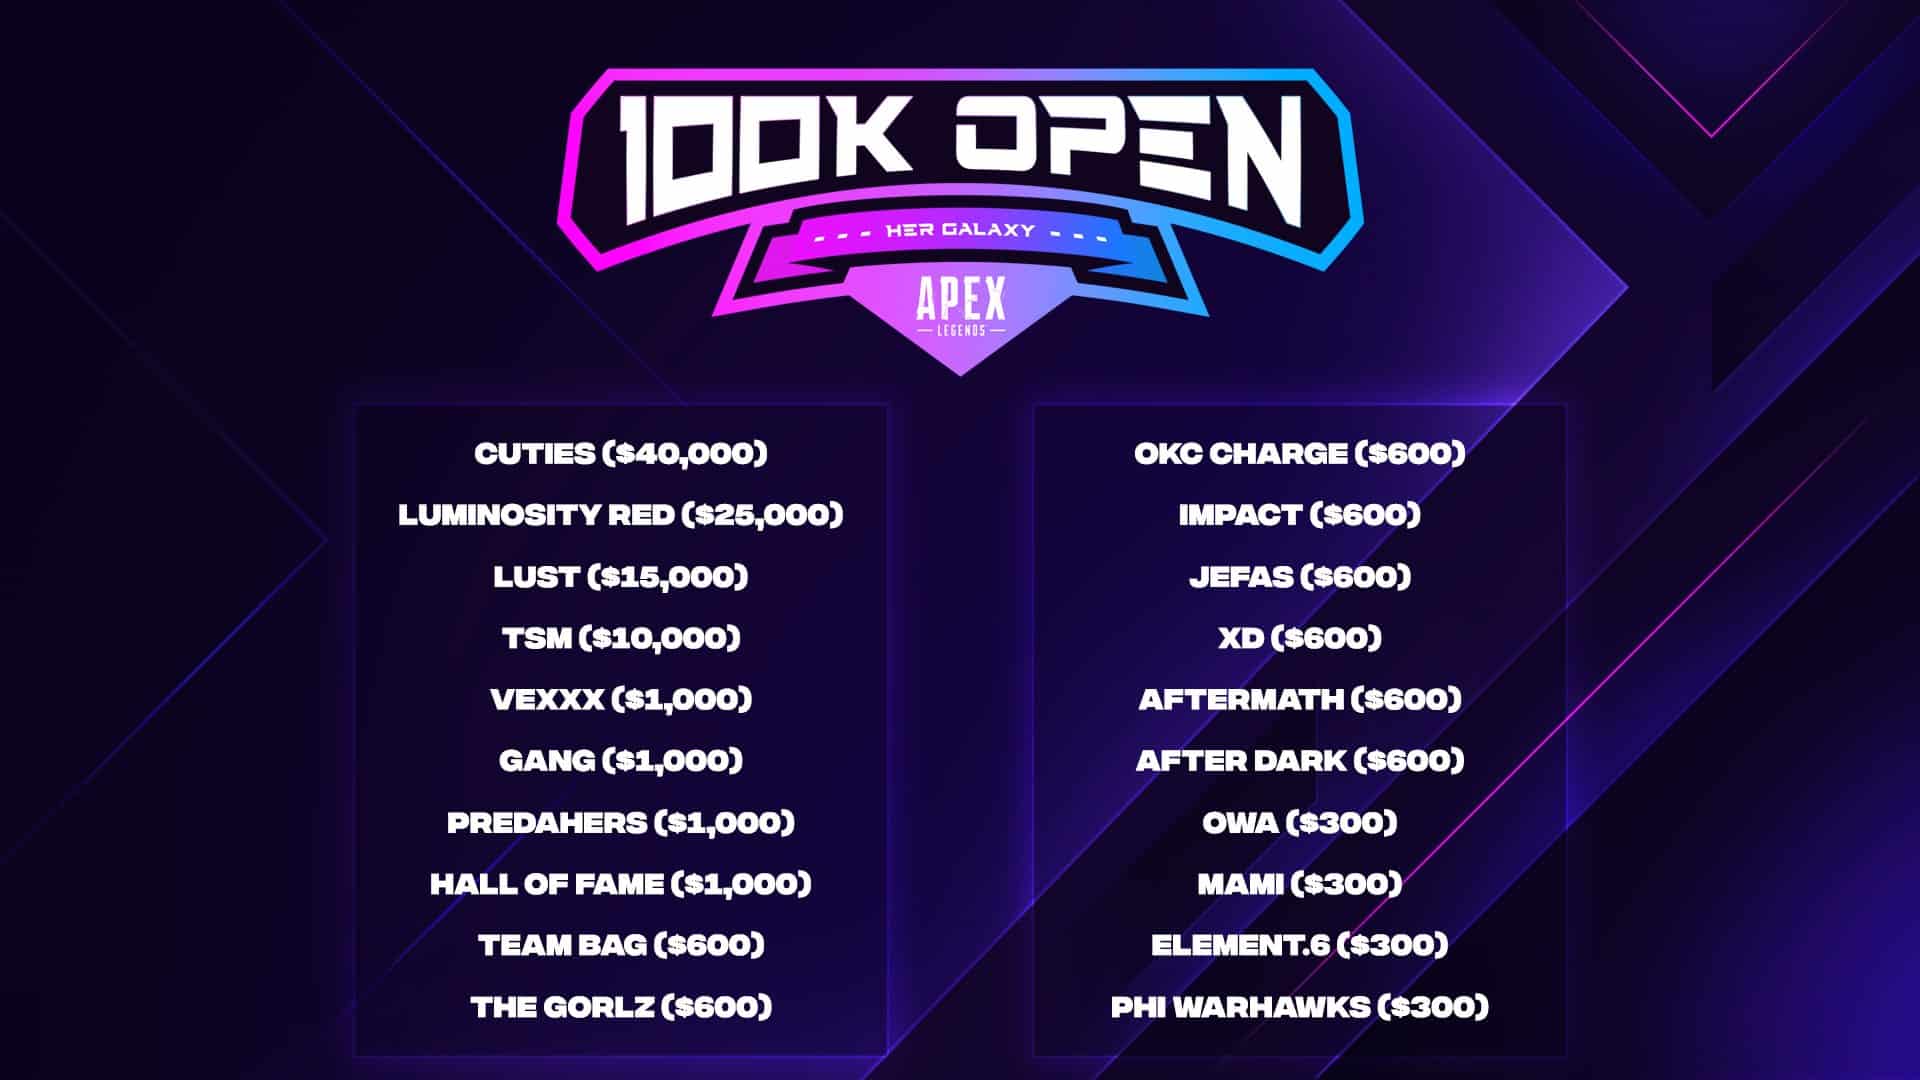 Price pool distribution of the Her Galaxy Apex Legends 100K Open.